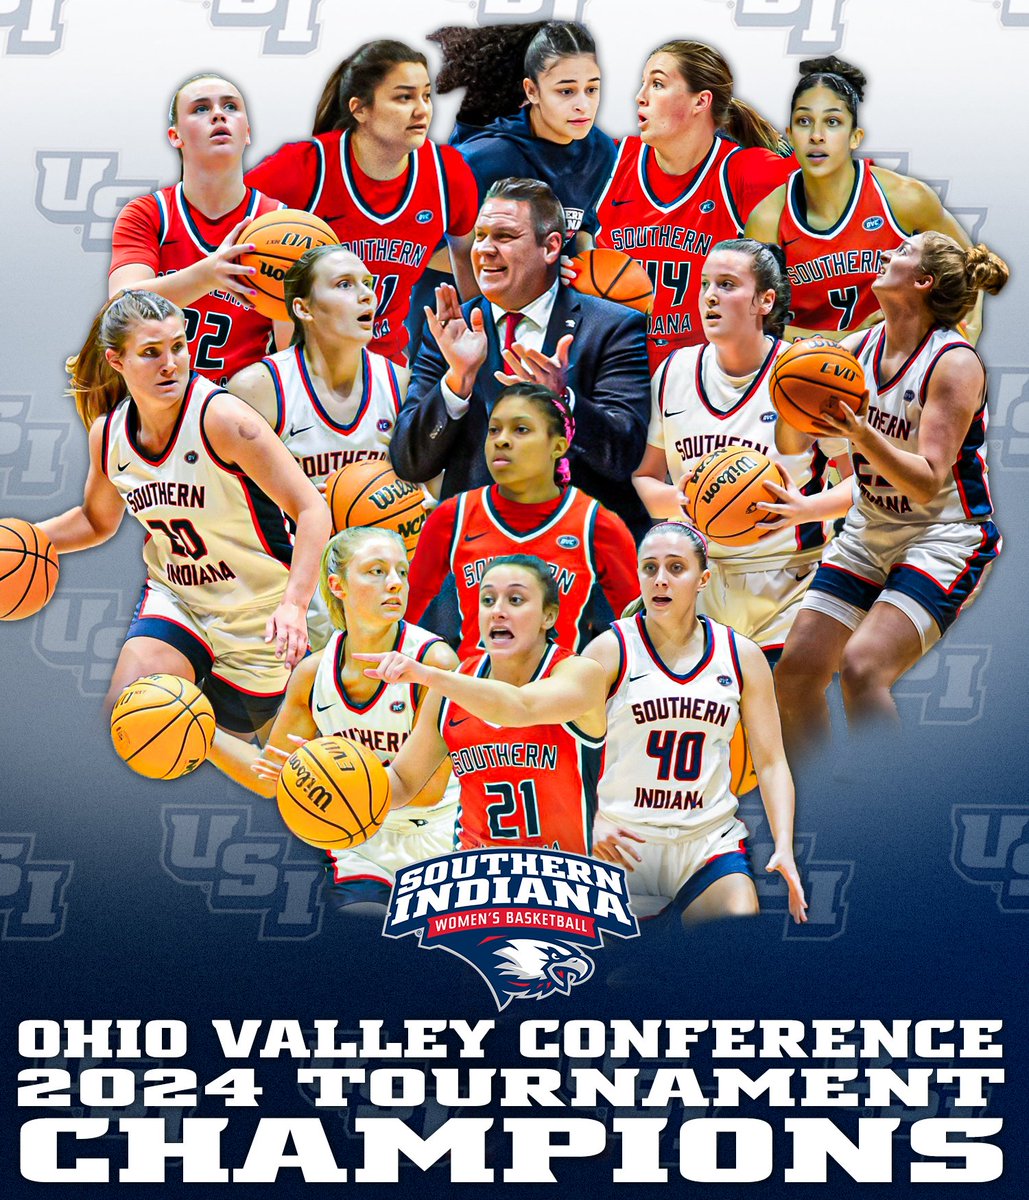 𝕮𝖍𝖆𝖒𝖕𝖎𝖔𝖓𝖘! 🏀🦅 @usiwbb is crowned 2024 @OVCSports Tournament Champions! This marks the first DI conference team championship in @USIedu history! #GoUSIEagles #OVCit #OVCTourney